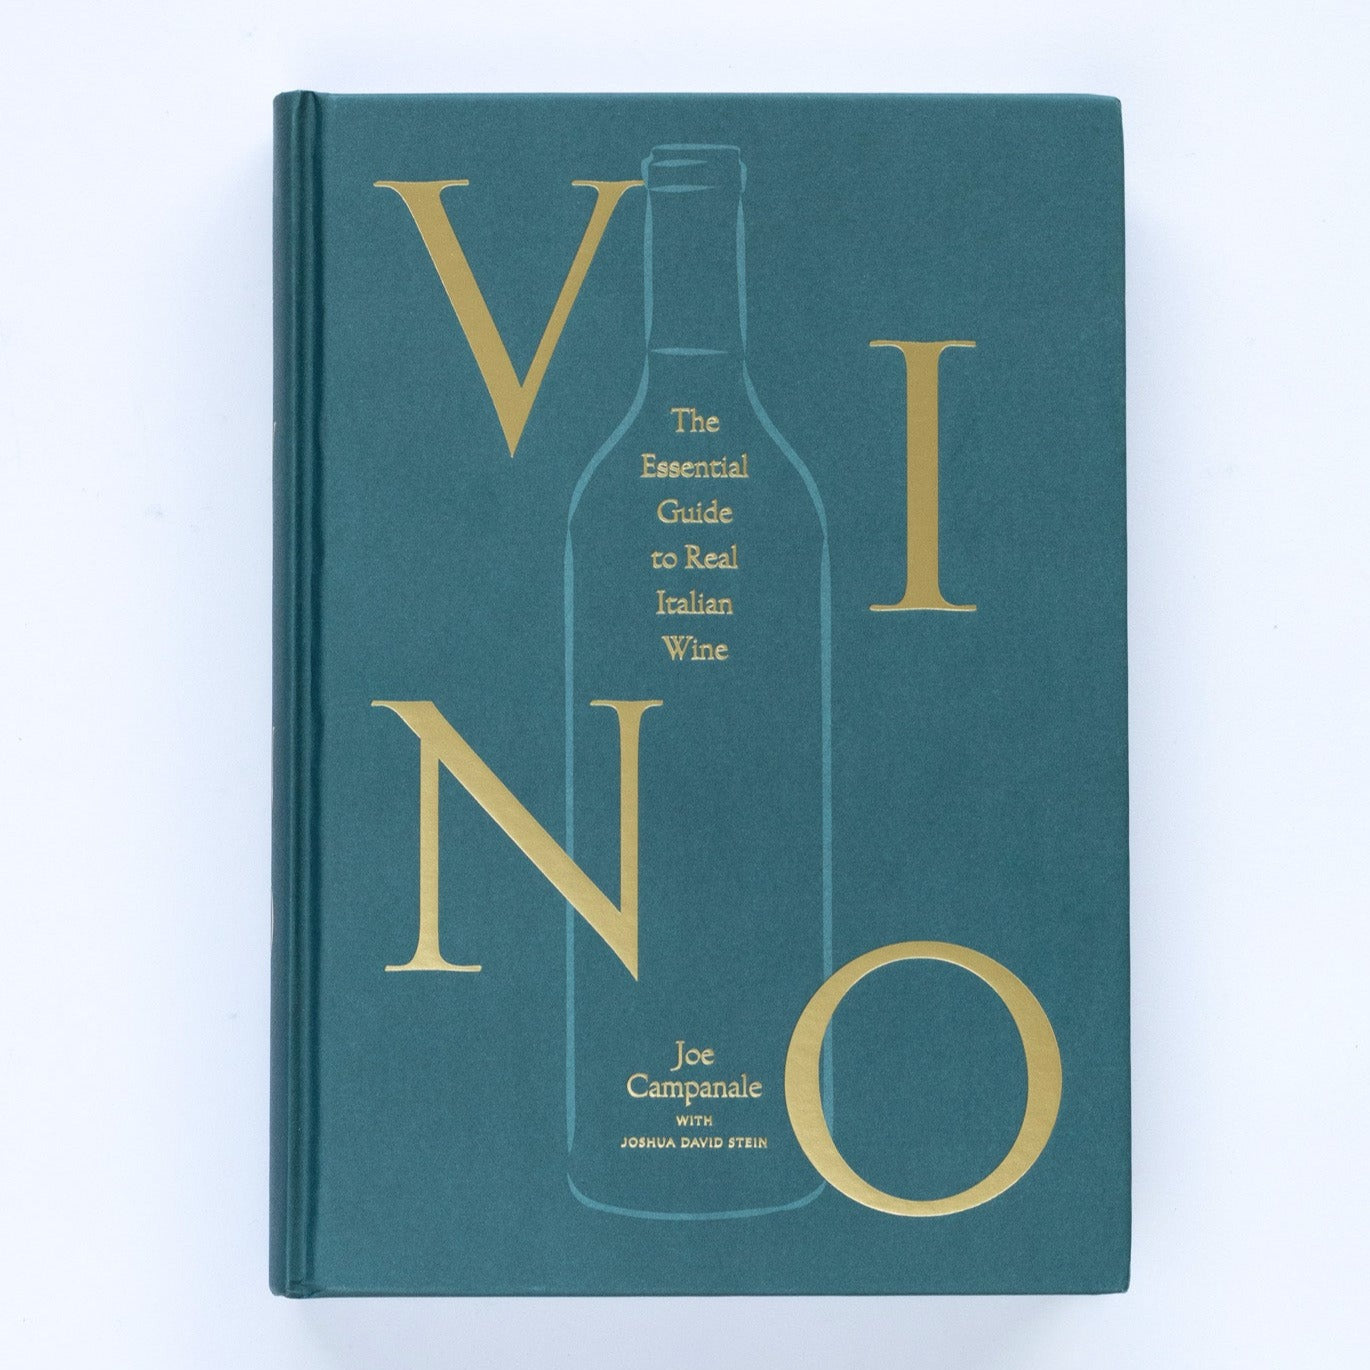 A blue green hardcover, linen wrapped book with light green illustration of wine bottle in middle and gold embossed text that reads, &quot;Vino: The Essential Guide to Real Italian Wine&quot; photographed on white background.